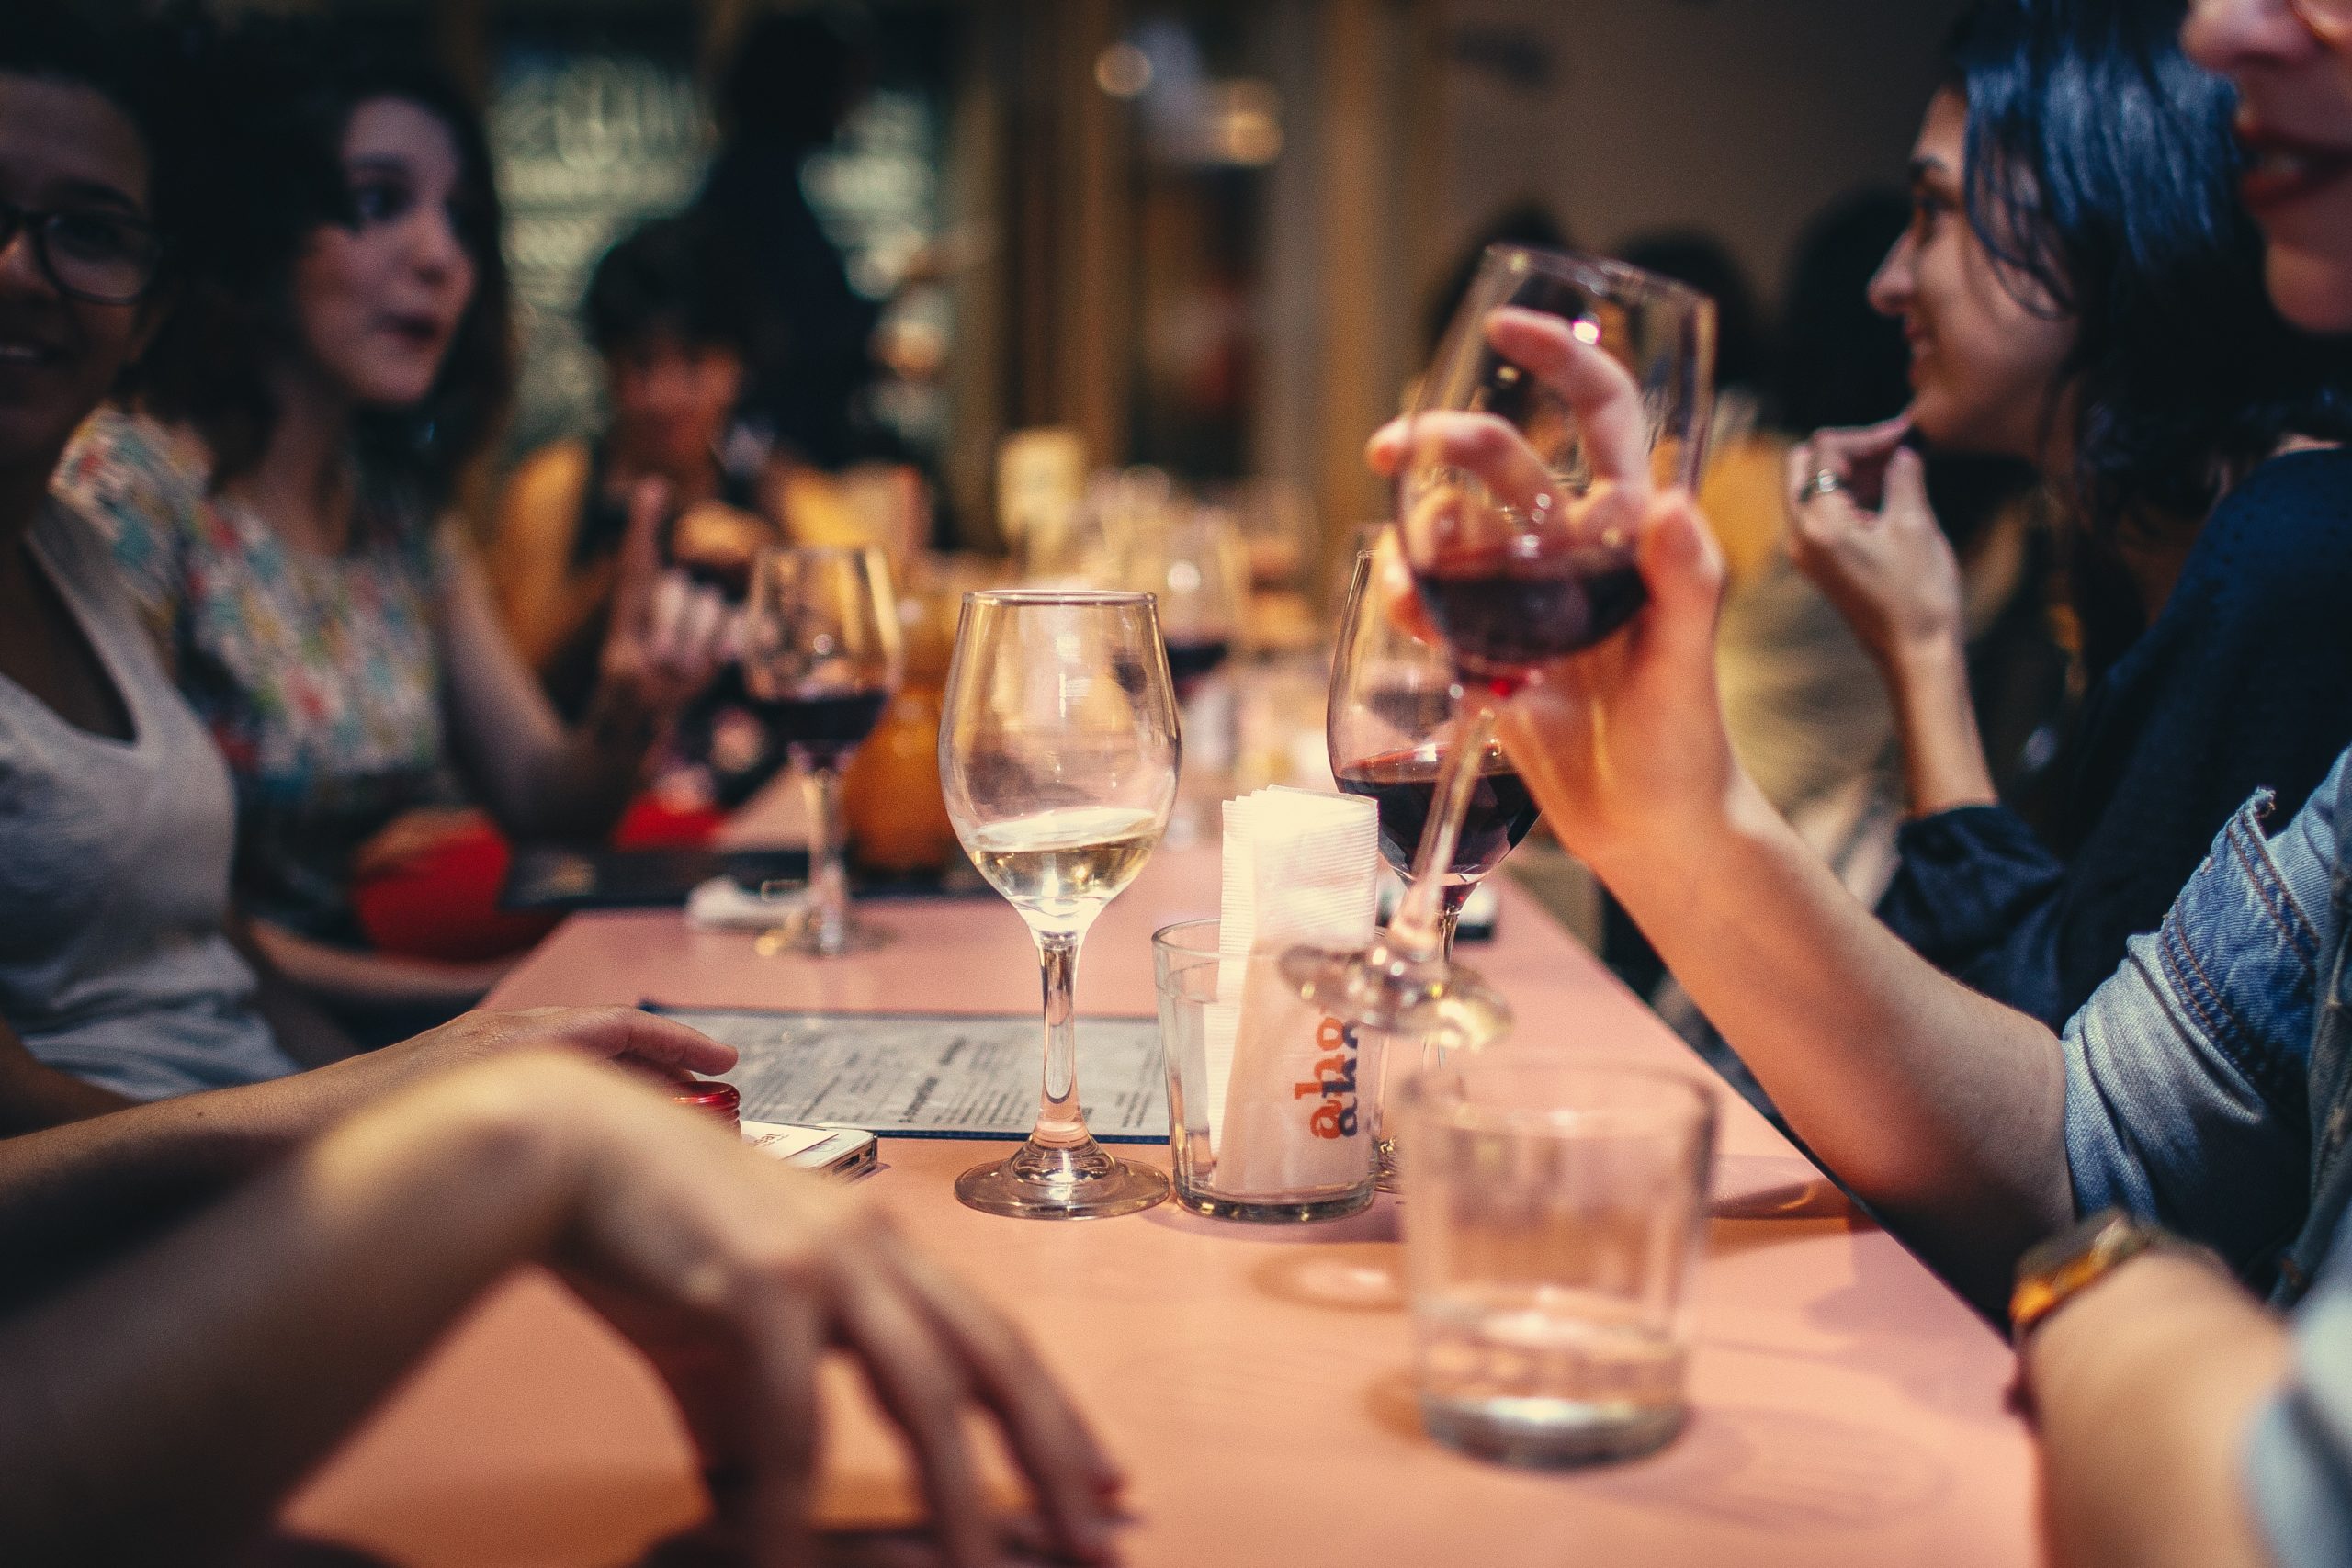 women with wine glasses networking at a restaurant